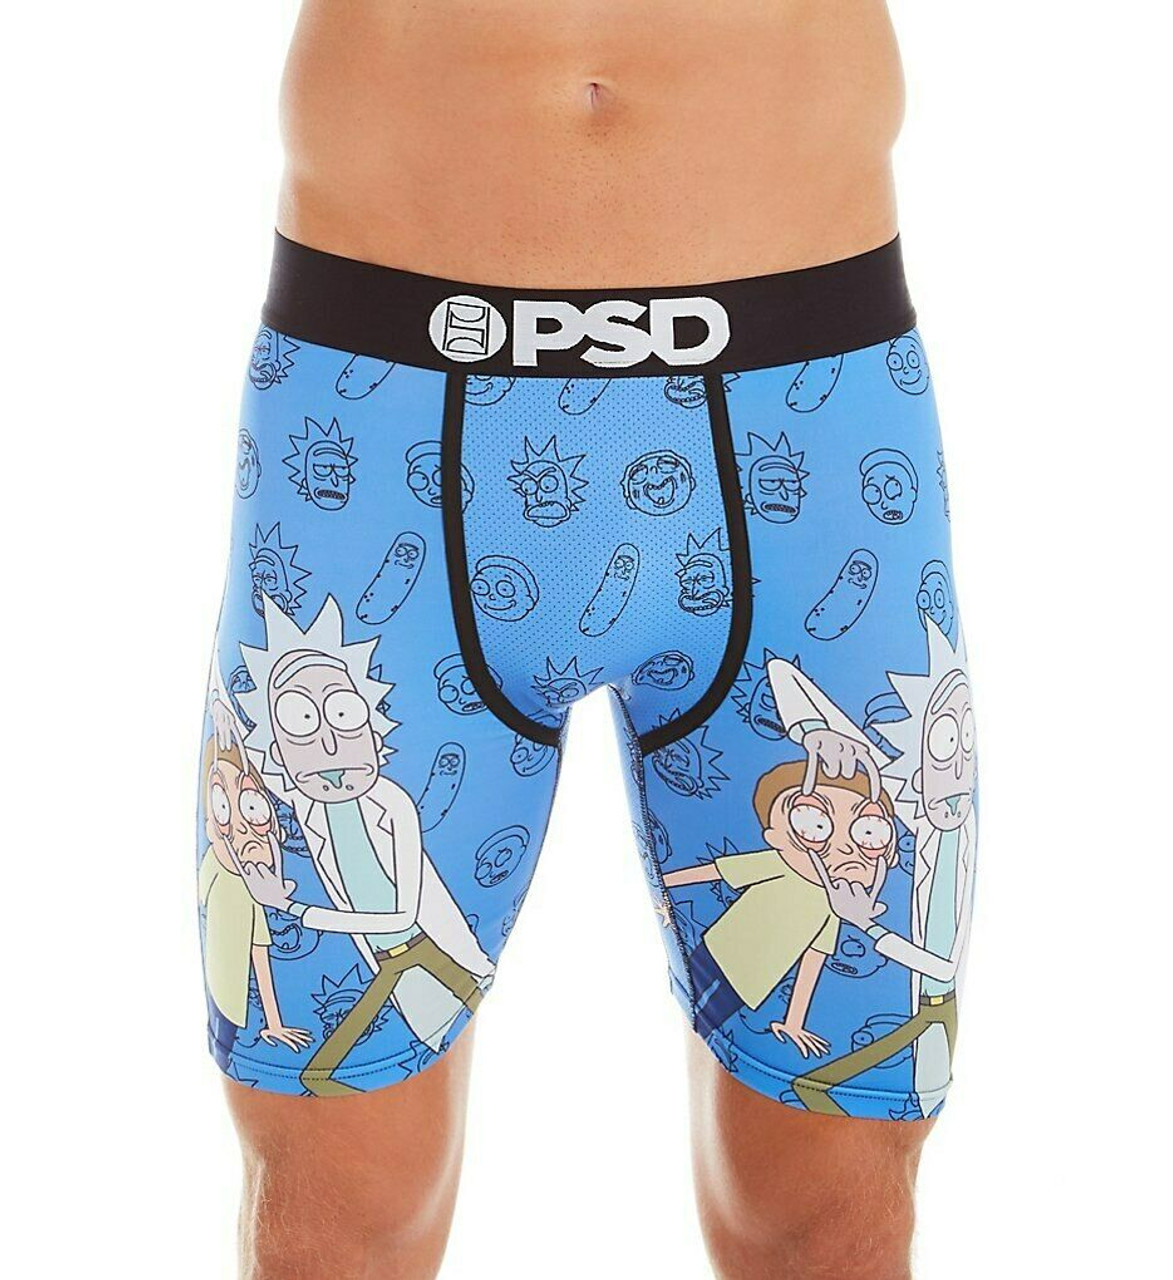 PSD Rick and Morty Look II Cartoons Athletic Boxer Briefs Underwear ...